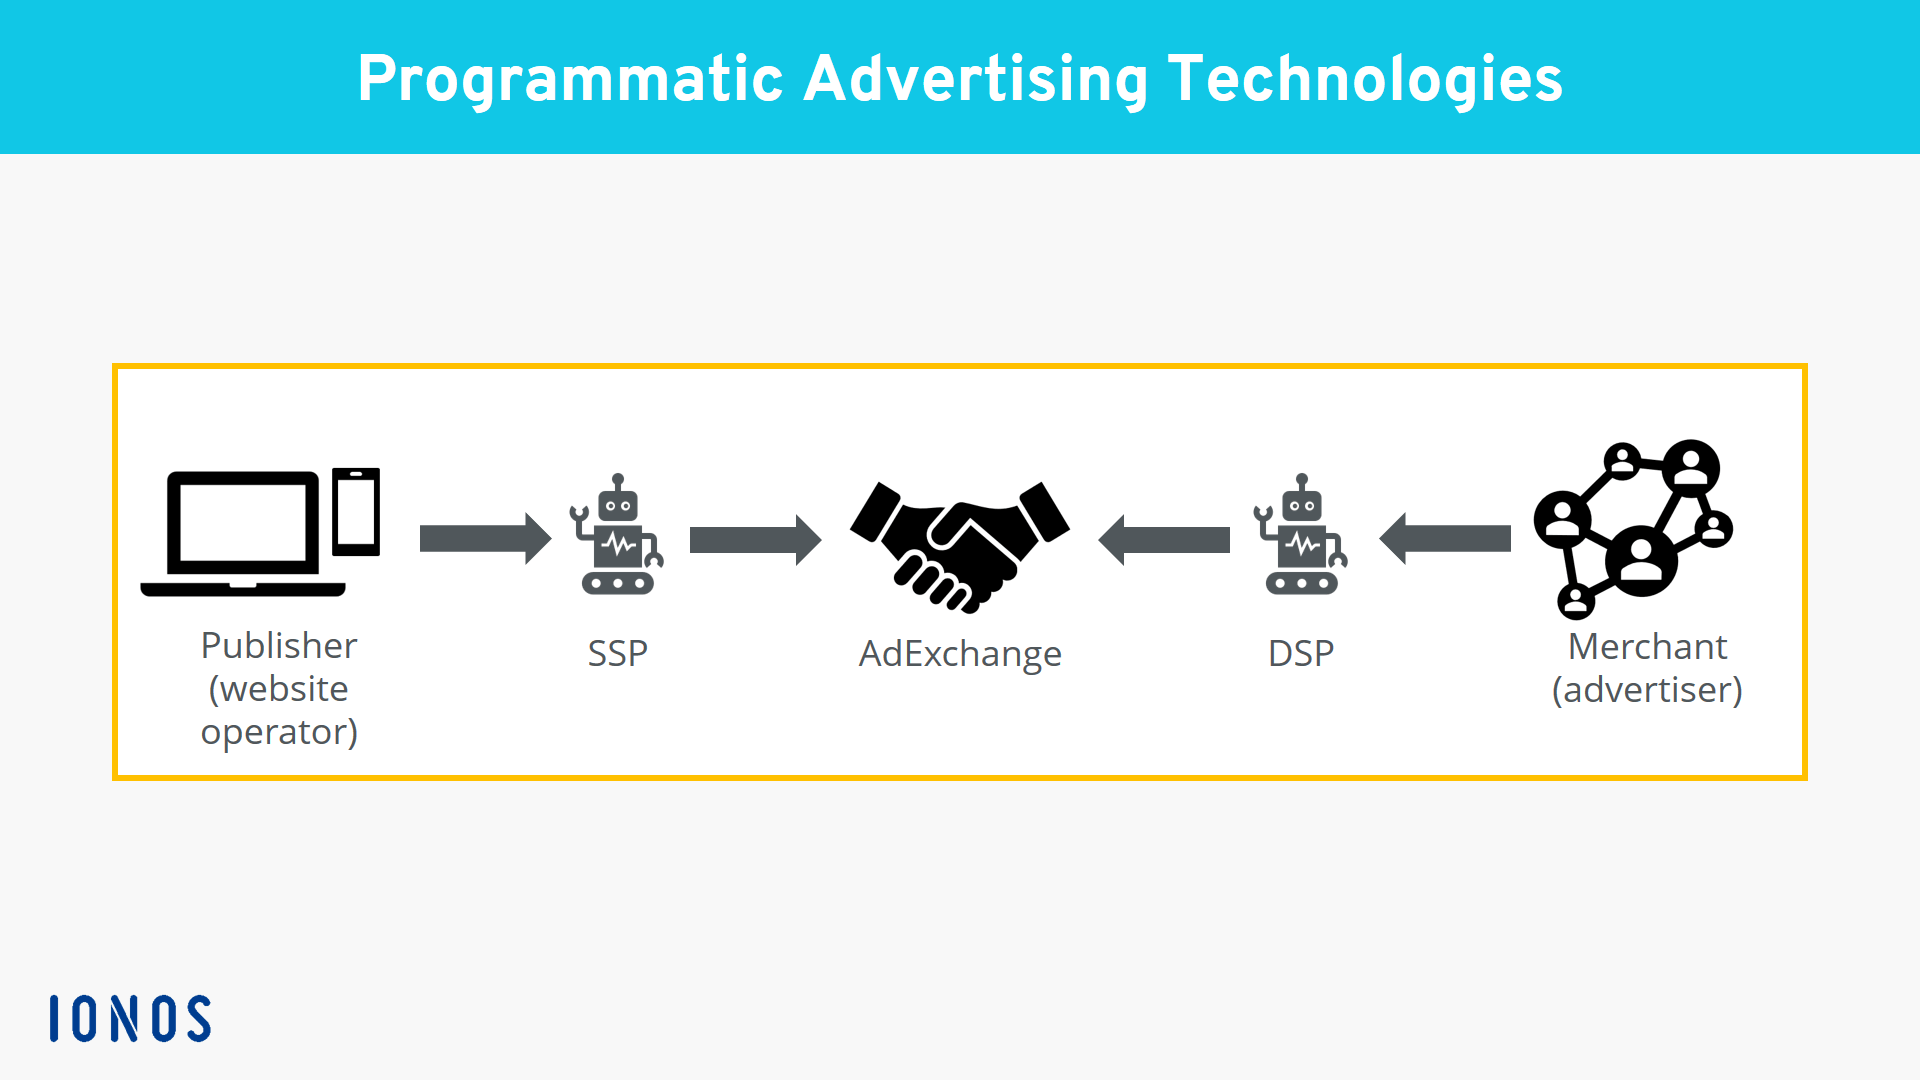 The technological structures in programmatic advertising